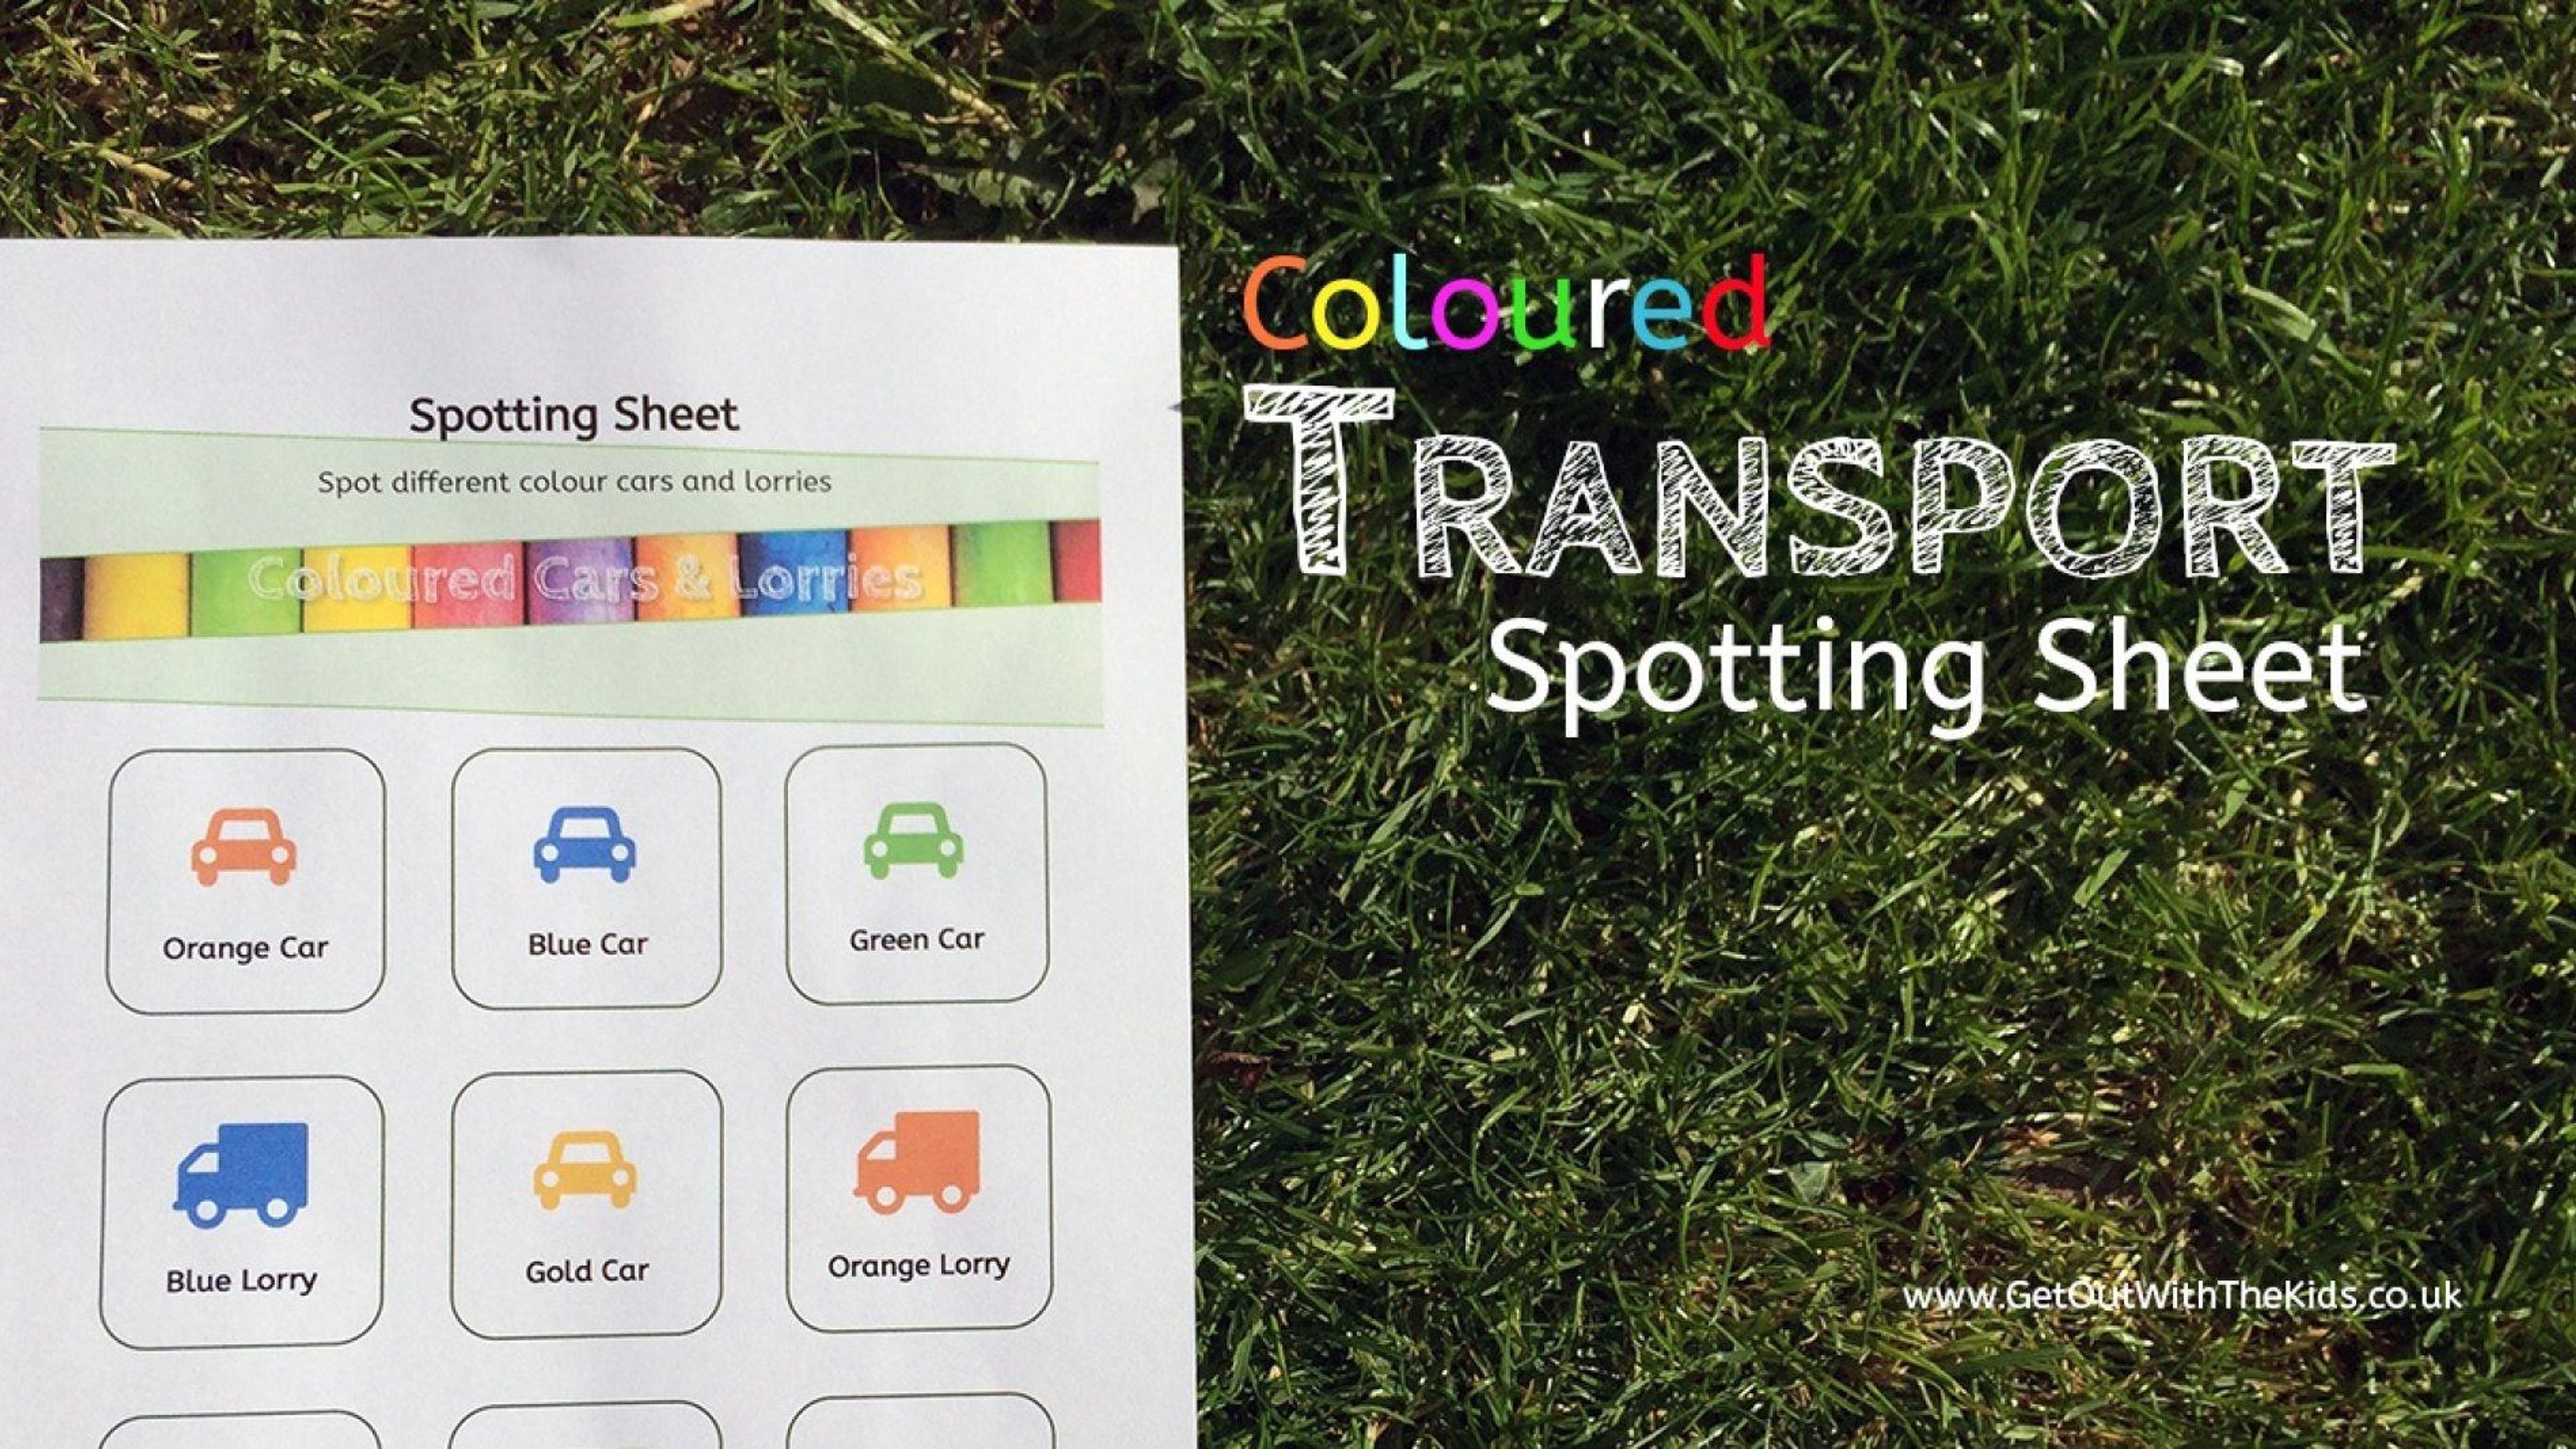 Download and print it out.

All your child has to do is cross off an item when they spot it.